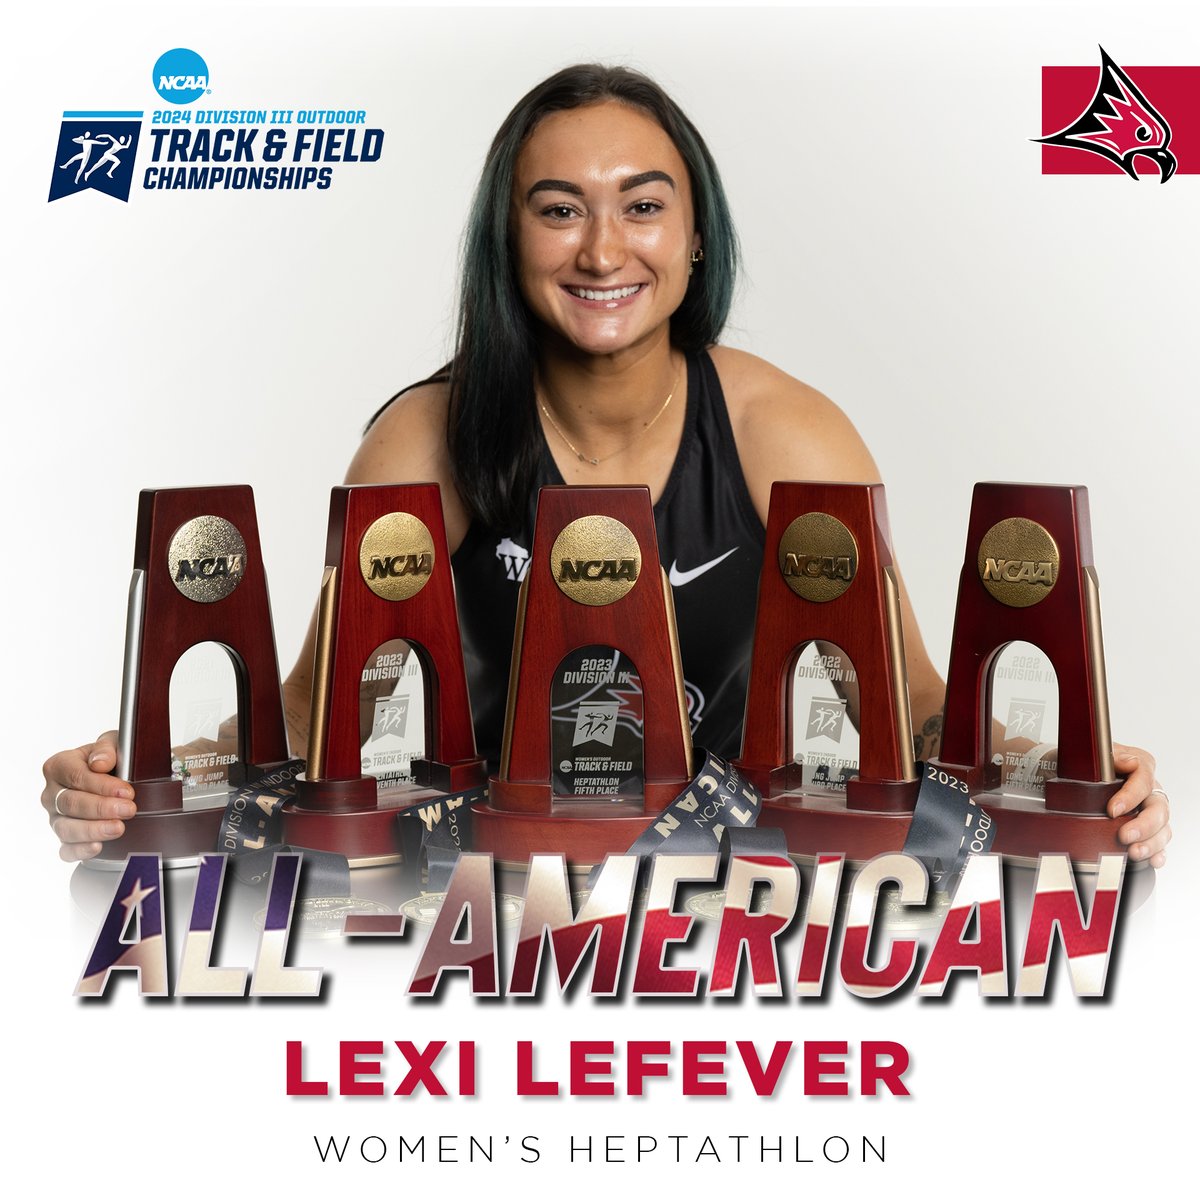 Heck of a way to wrap up your decorated career, Lexi 🇺🇸 LeFever finished 6th in the women's heptathlon at the NCAA Outdoor Championships with 4,871 points to earn her sixth career All-America honor 🏆🏆🏆🏆🏆🏆 #FFT